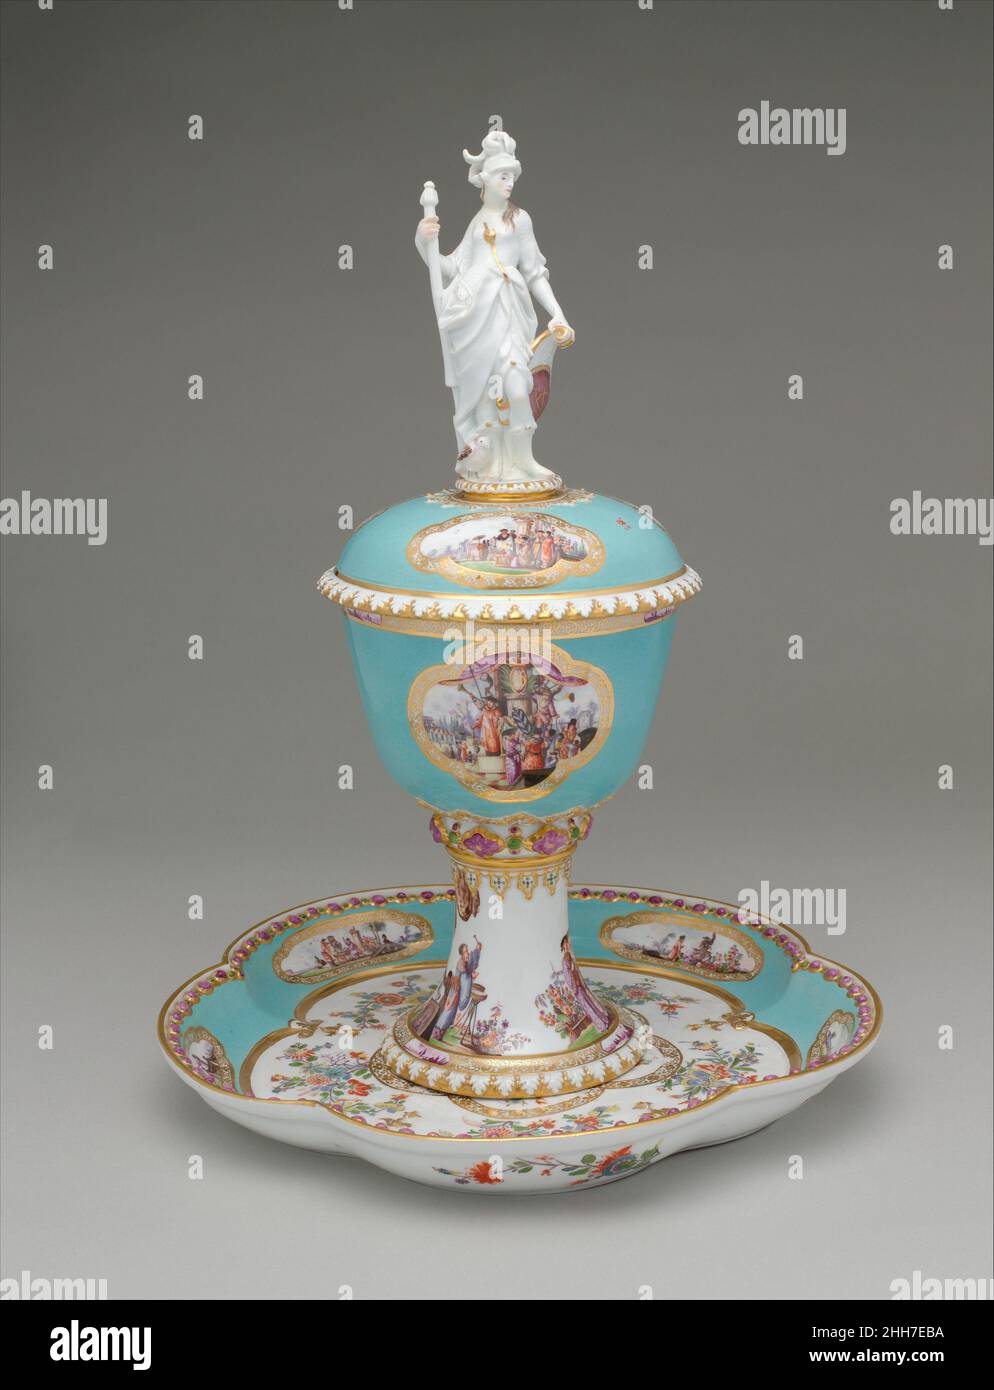 Standing cup with cover and stand ca. 1735 Meissen Manufactory German Commissioned by Augustus the Strong, Elector of Saxony and King of Poland, to commemorate the state visit to Dresden in January 1728 of the king and queen of Prussia, parents of Frederick the Great. The queen’s initials, SD for Sophie-Dorothea, are three times displayed. The larger finial figure of Athena is closely related to a silver statuette in the Electoral collections at Dresden, made by Philipp Kuesel of Augsburg before 1700. The turquoise ground has reserves with gold-lace borders painted by Heroldt with colorful chi Stock Photo